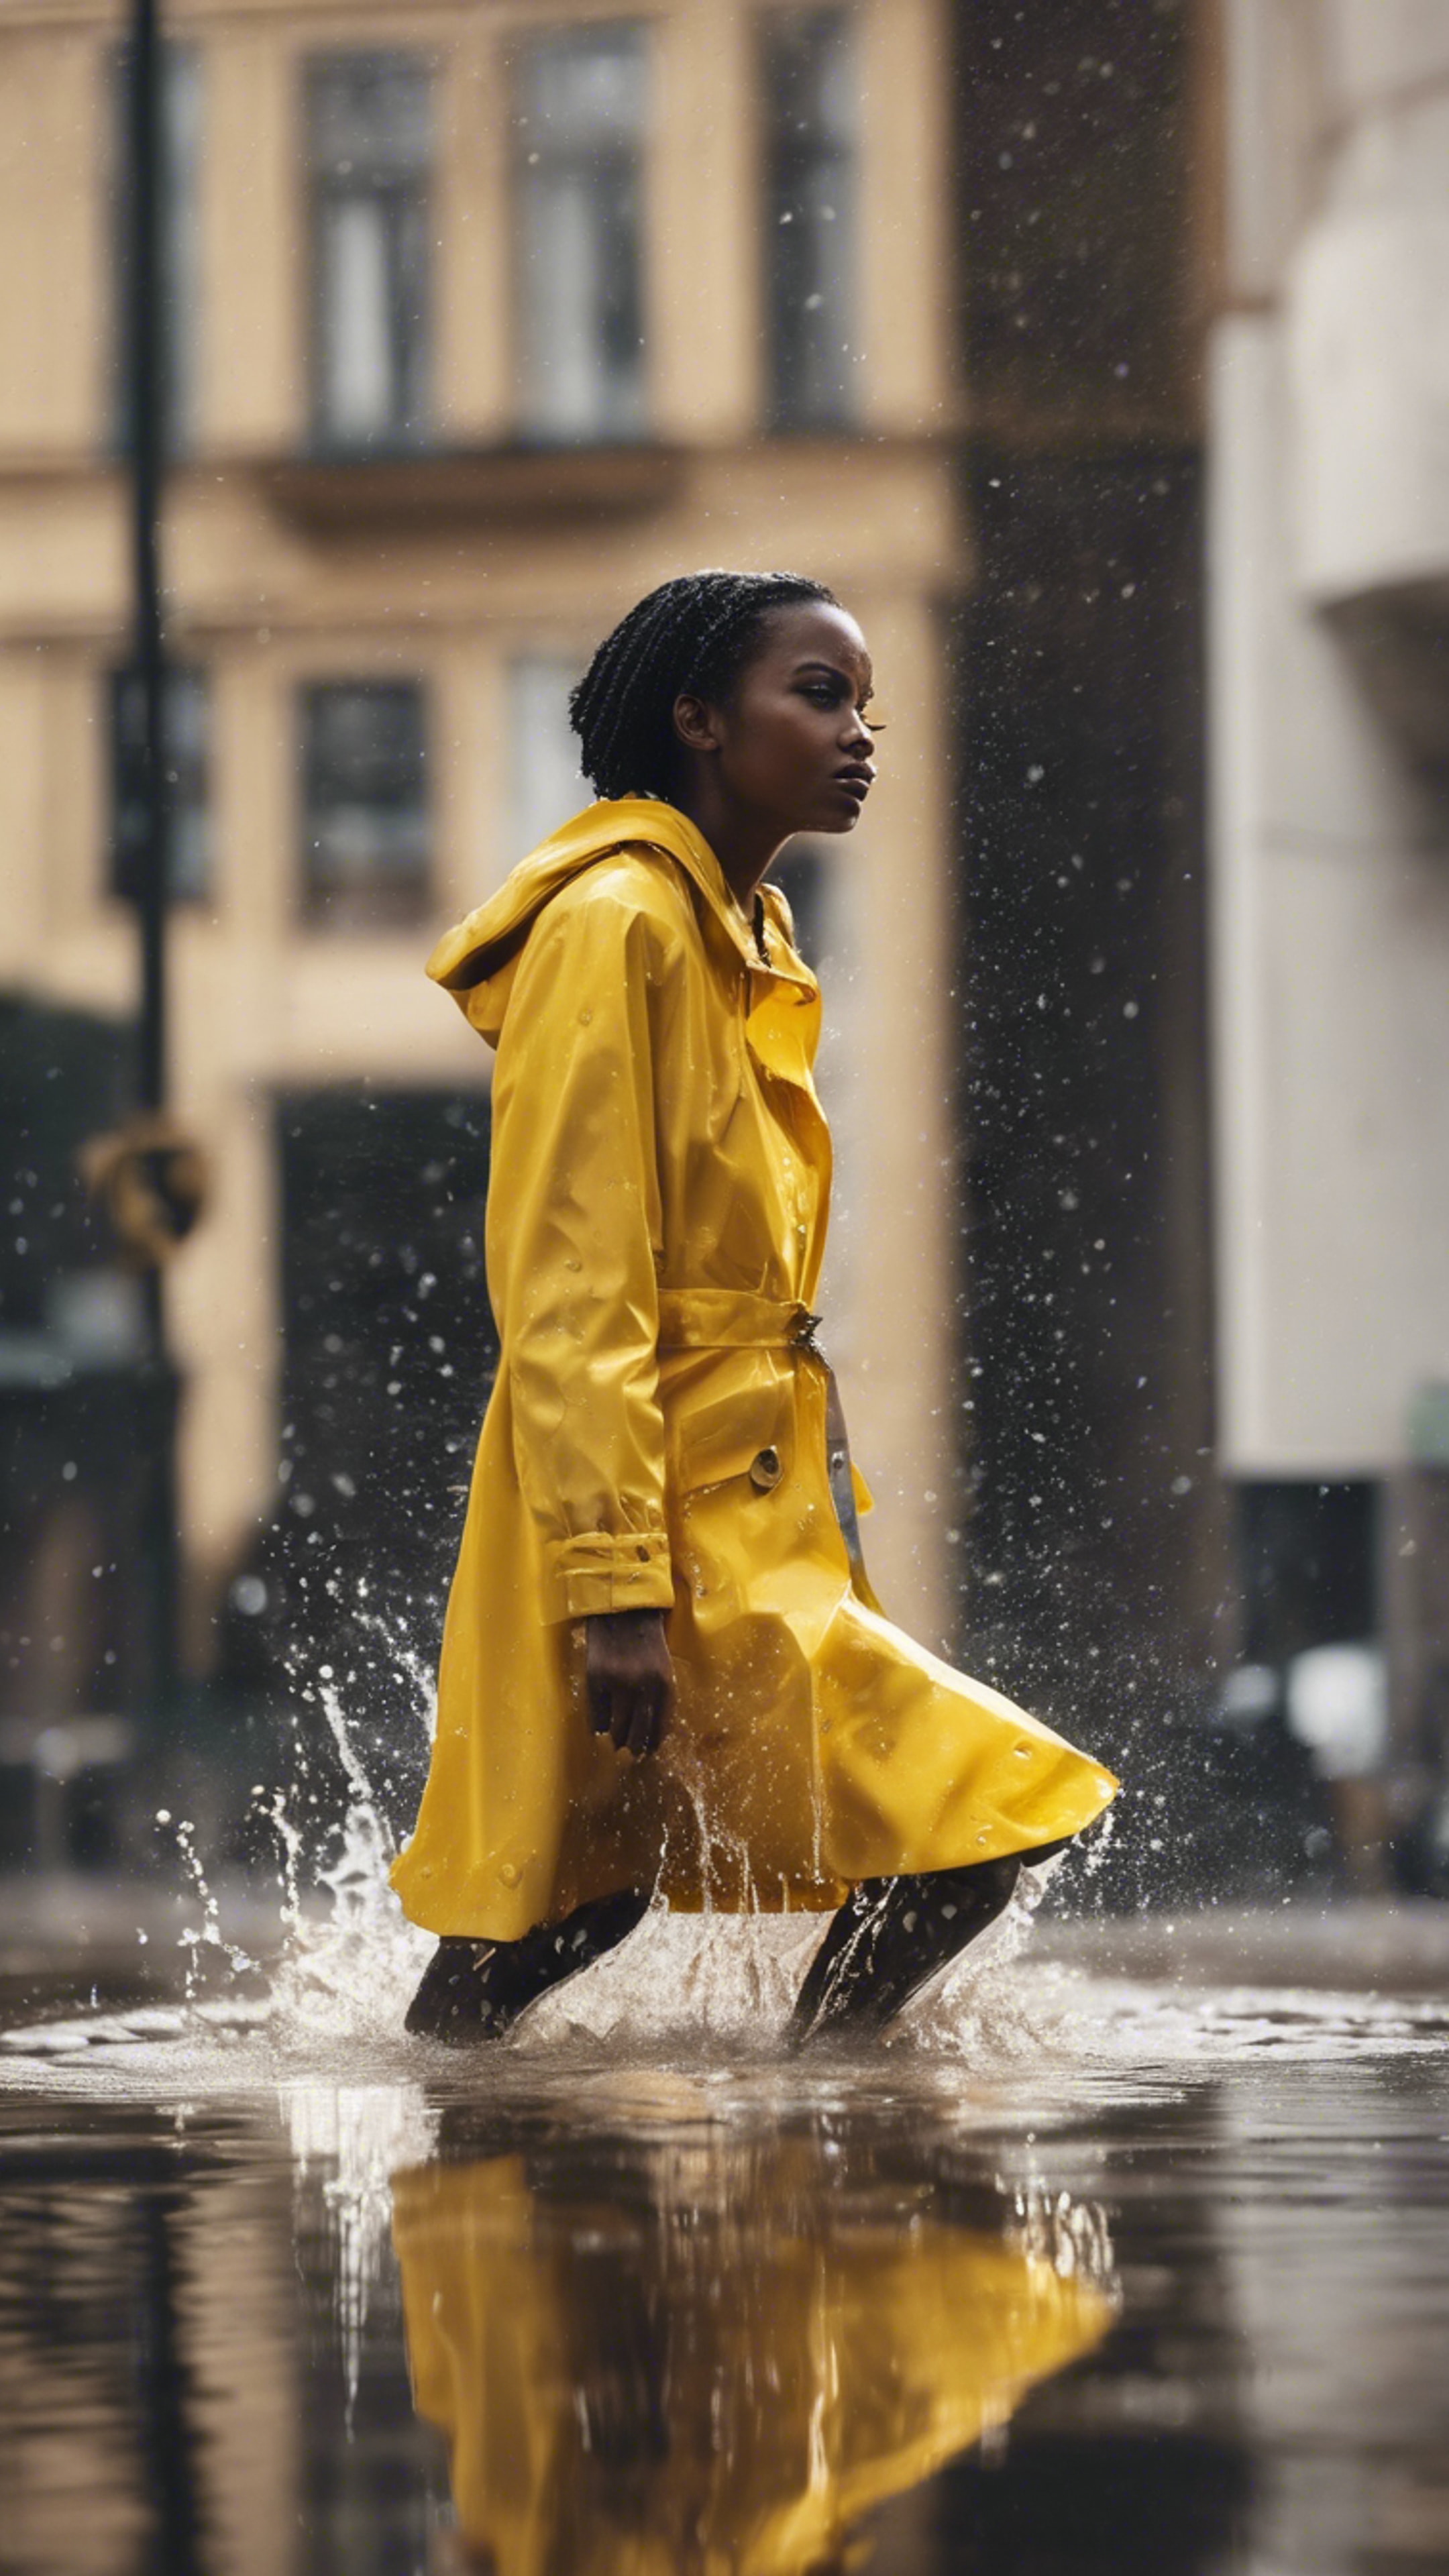 A black girl in a bright yellow raincoat splashing water in puddles after a heavy rain. טפט[a80398e4c066404db875]